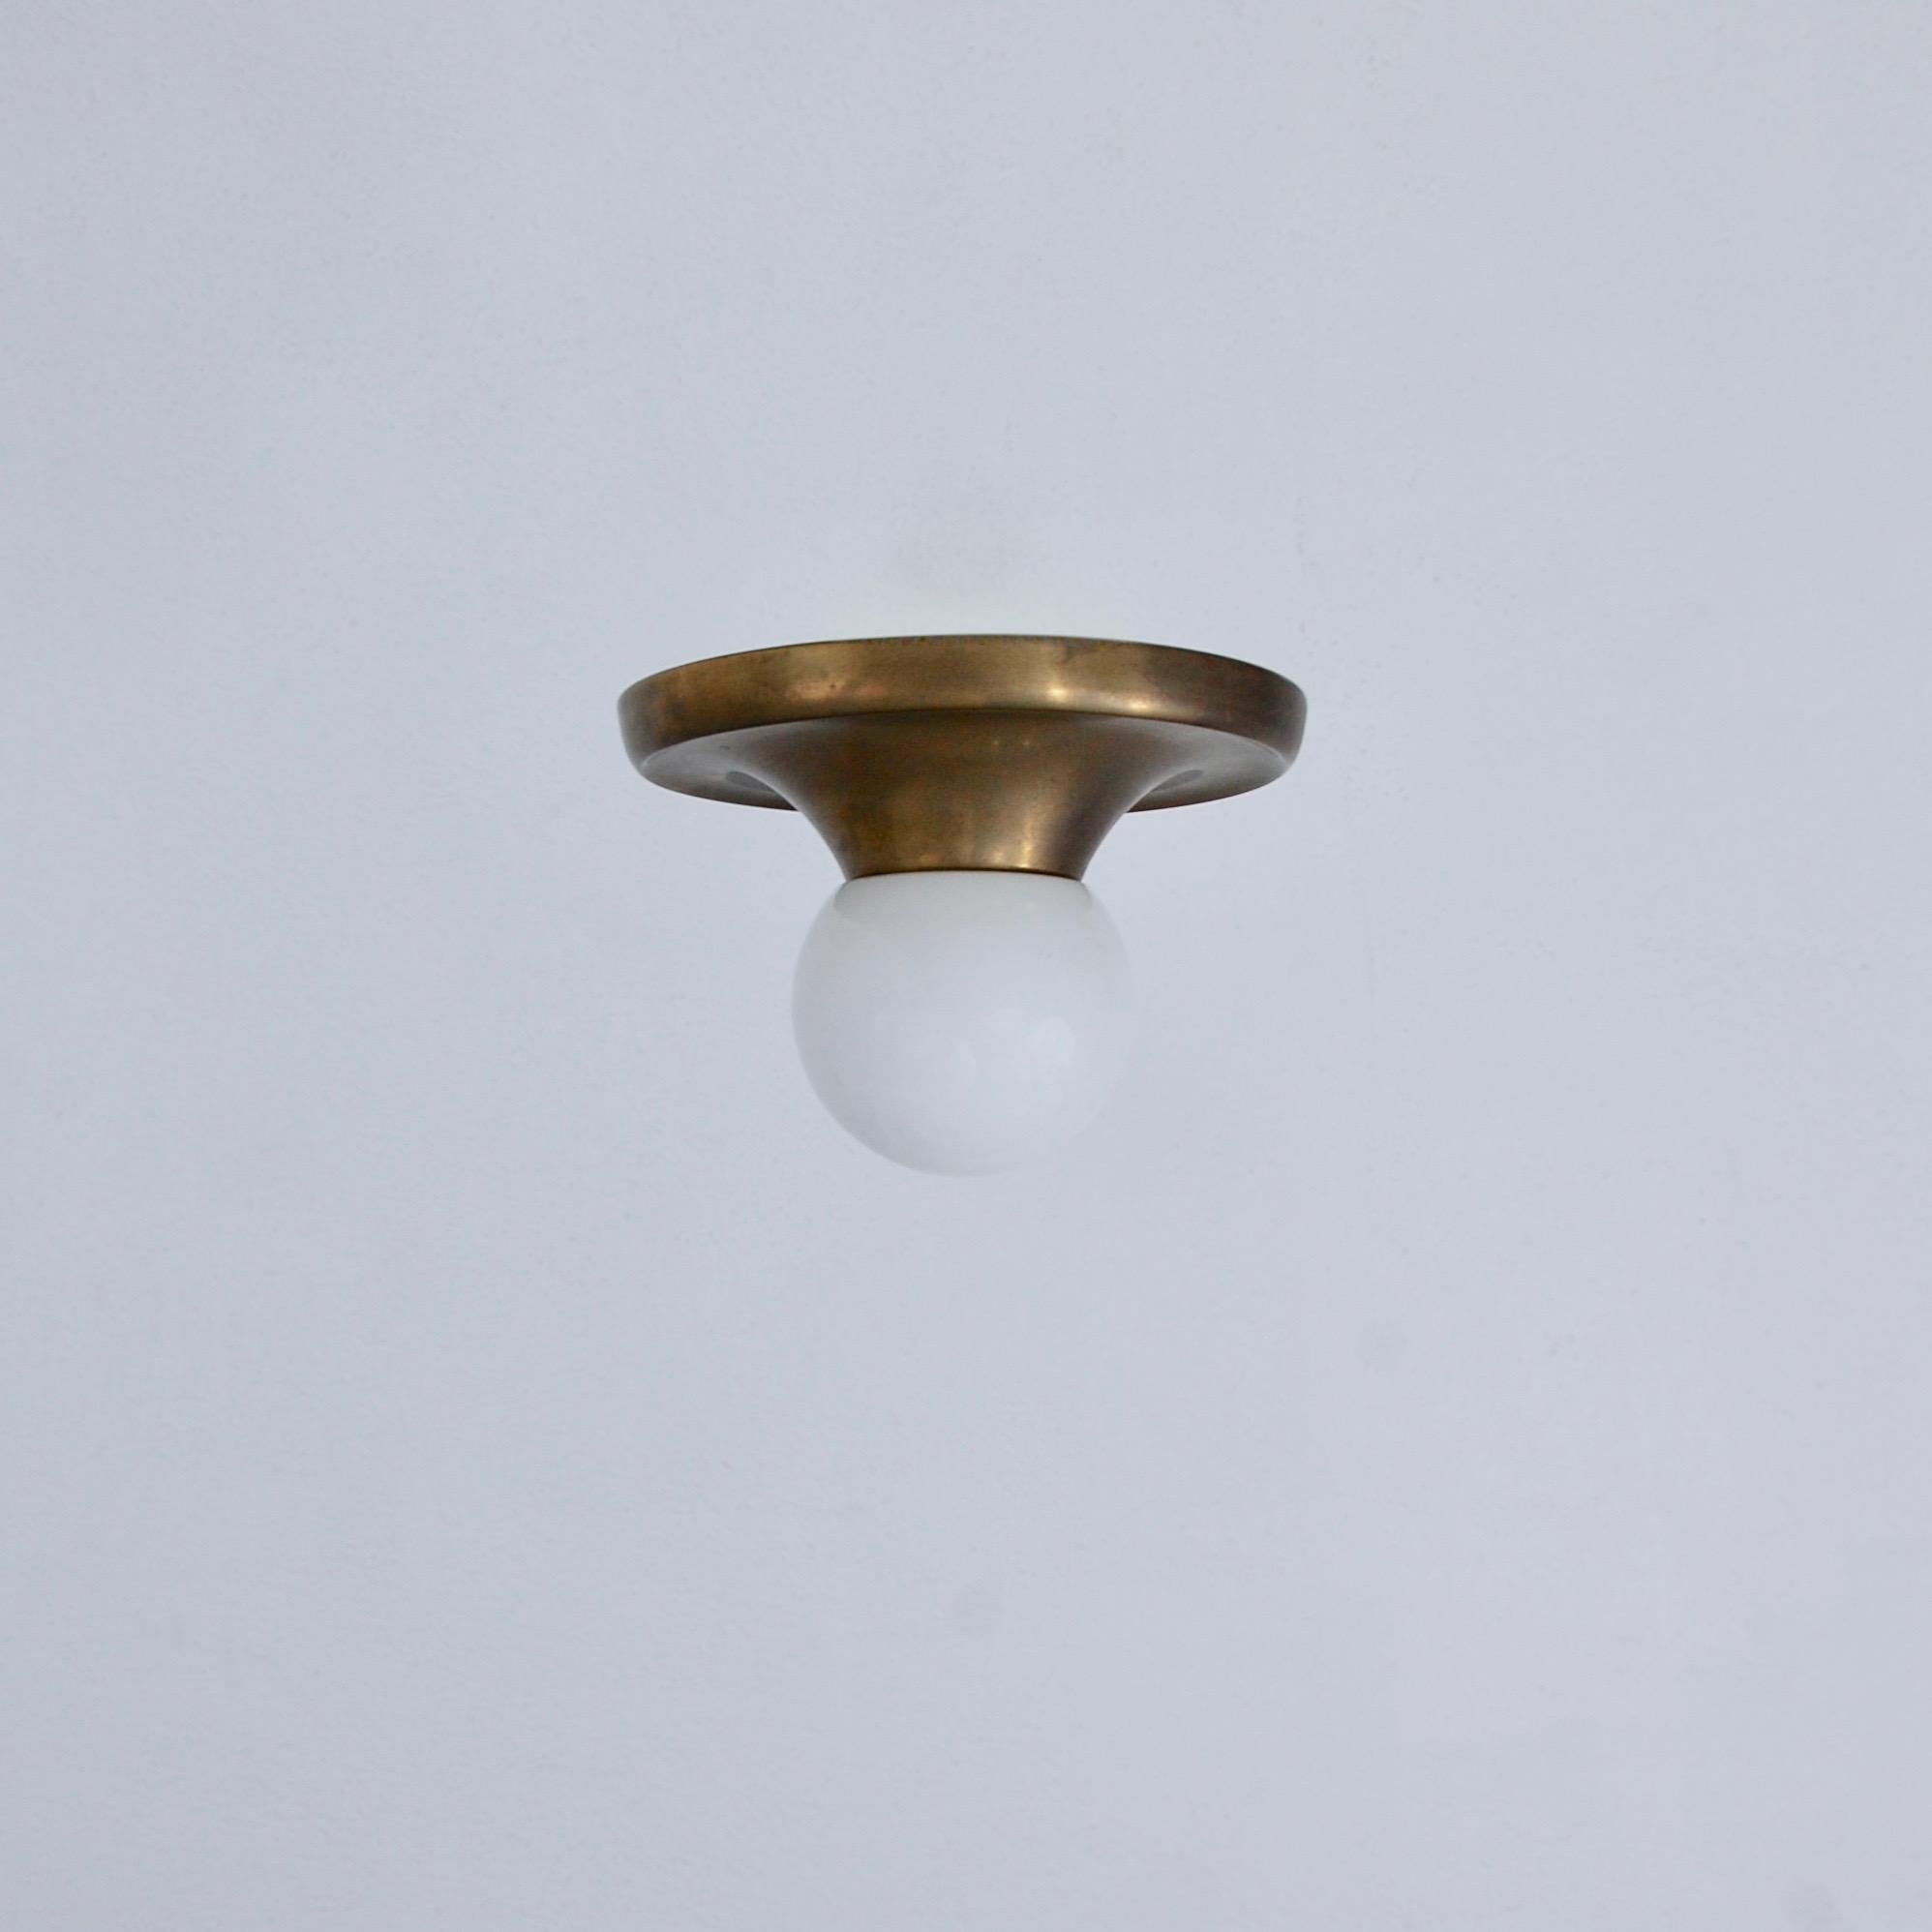 Classic 1950s Italian flushmount (or wall mount) fixture by Achille Castiglioni in naturally aged brass and glass with (1) E26 medium based socket. Light bulb included with order.
Measurements:
Fixture height 6.5”
Diameter 9.5”.
 